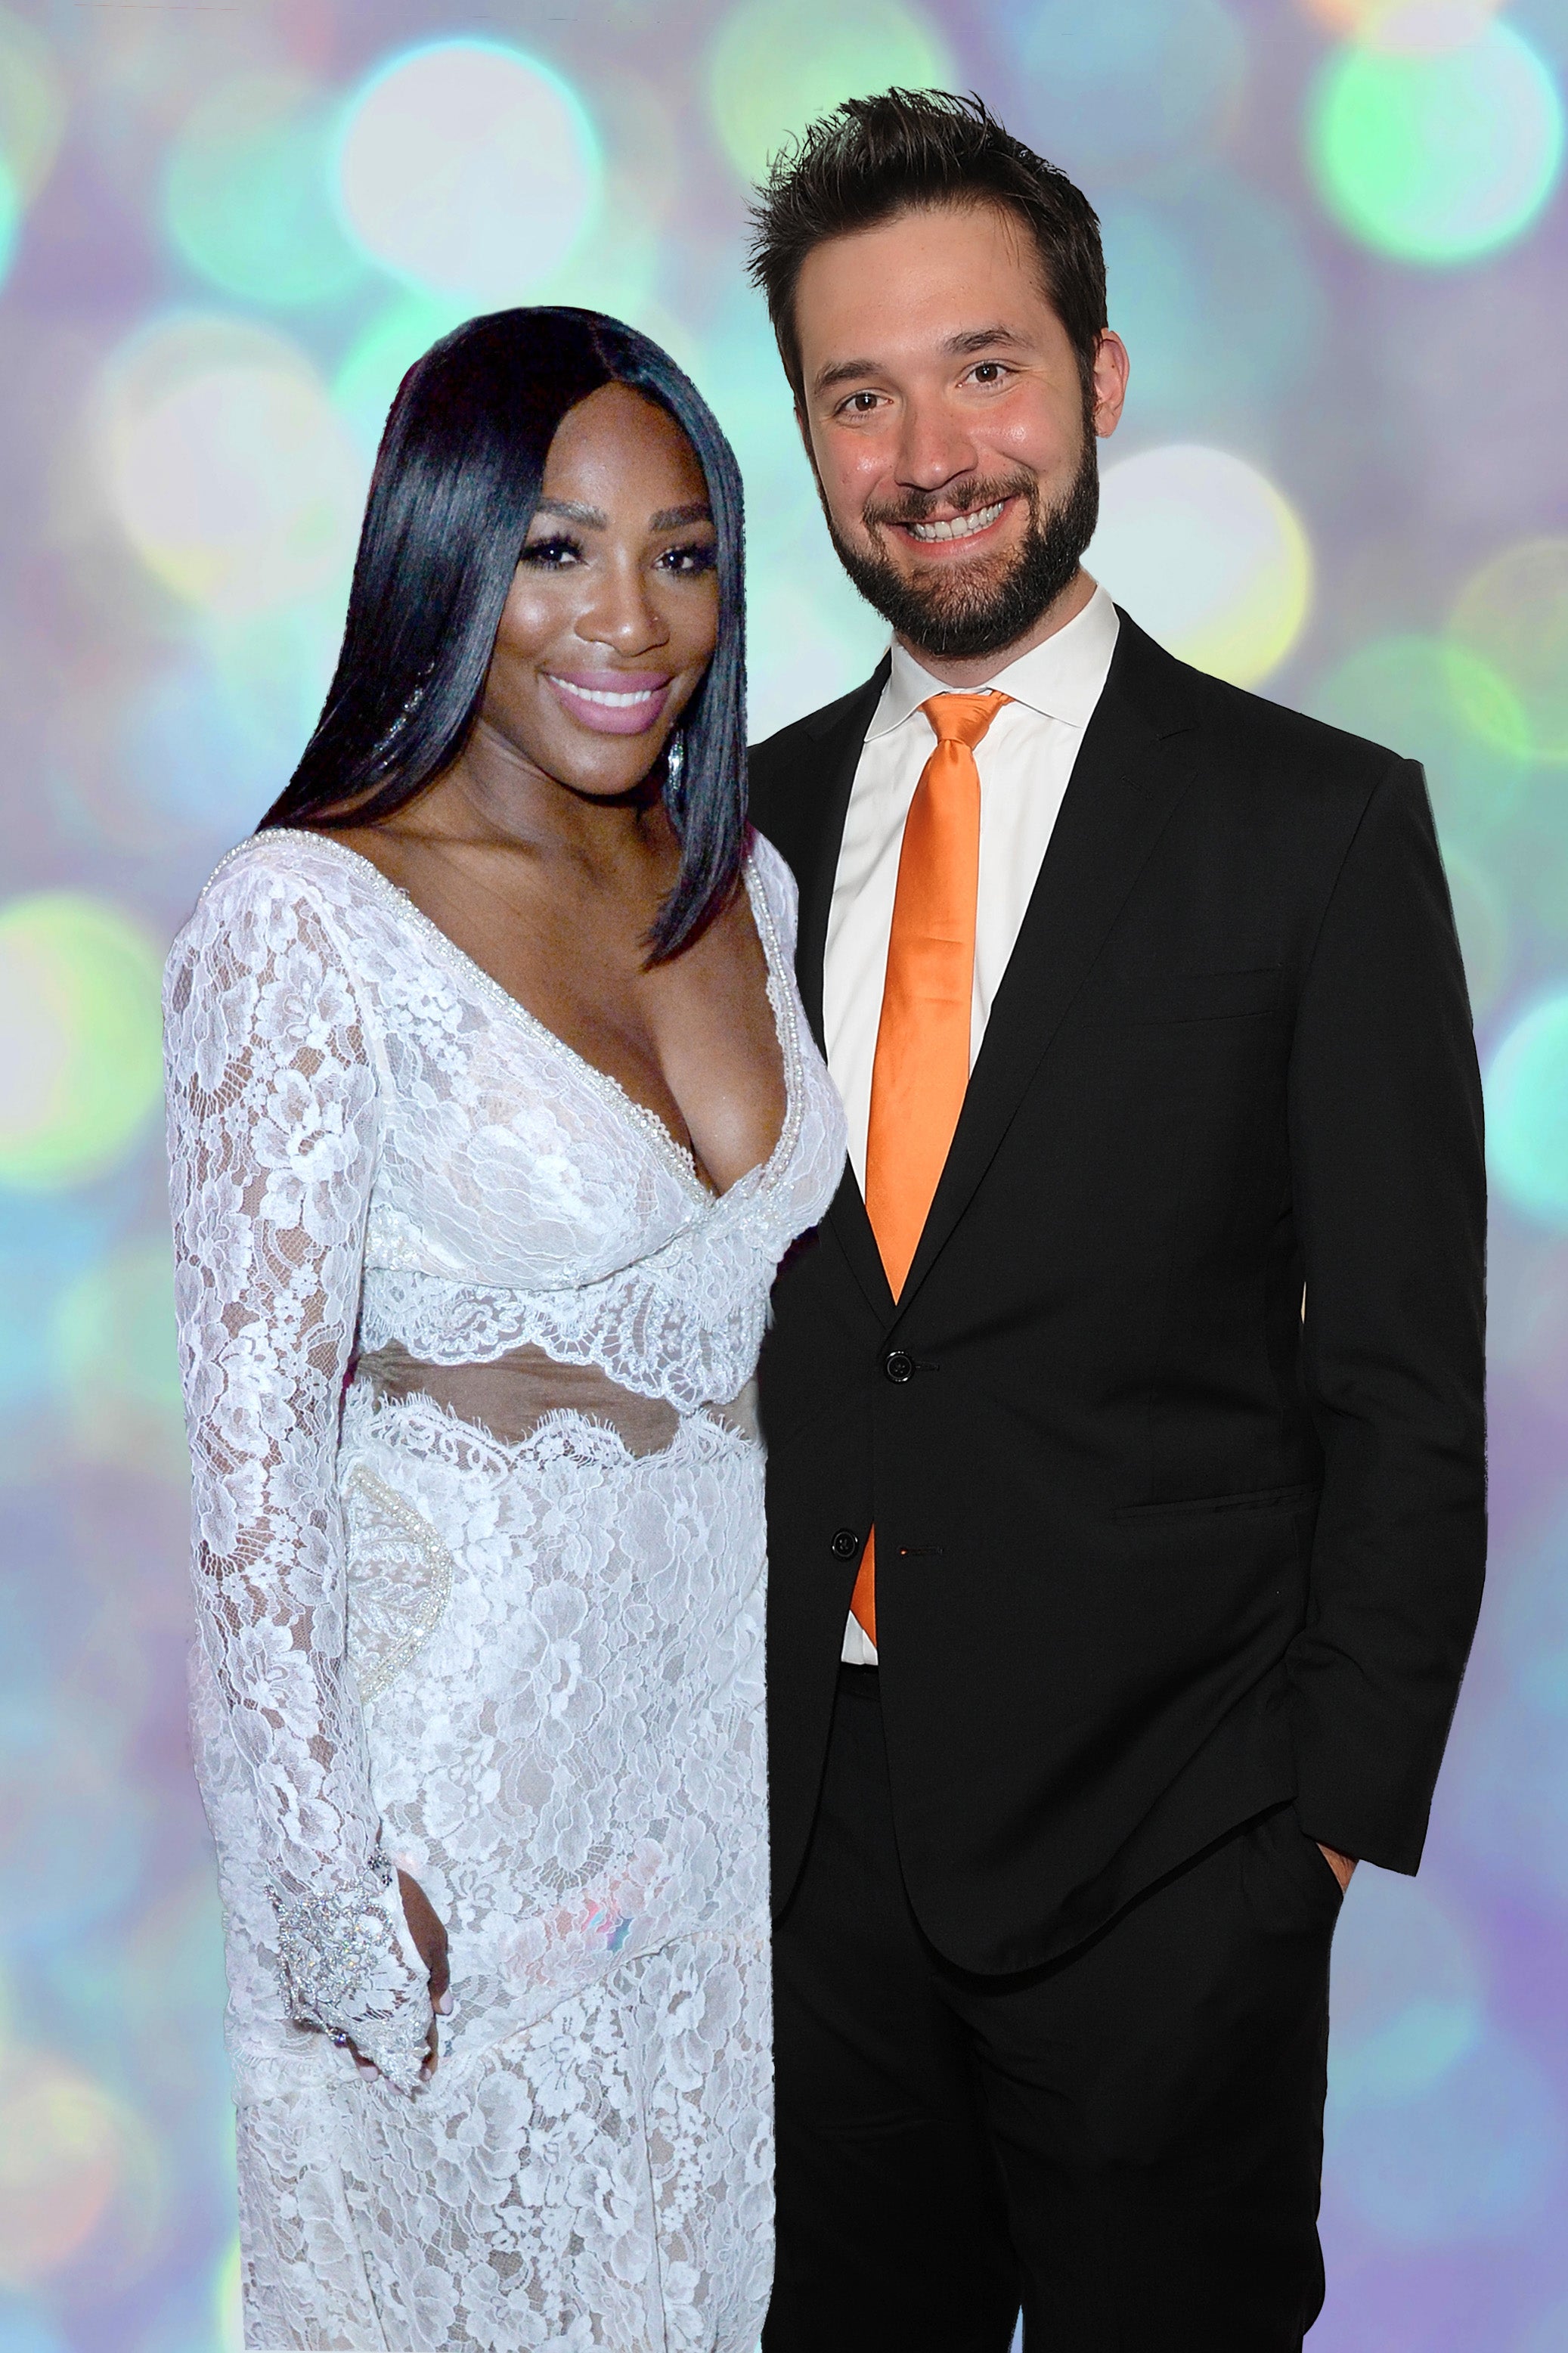  Serena  Williams  Engaged to Reddit Co Founder Alexis  